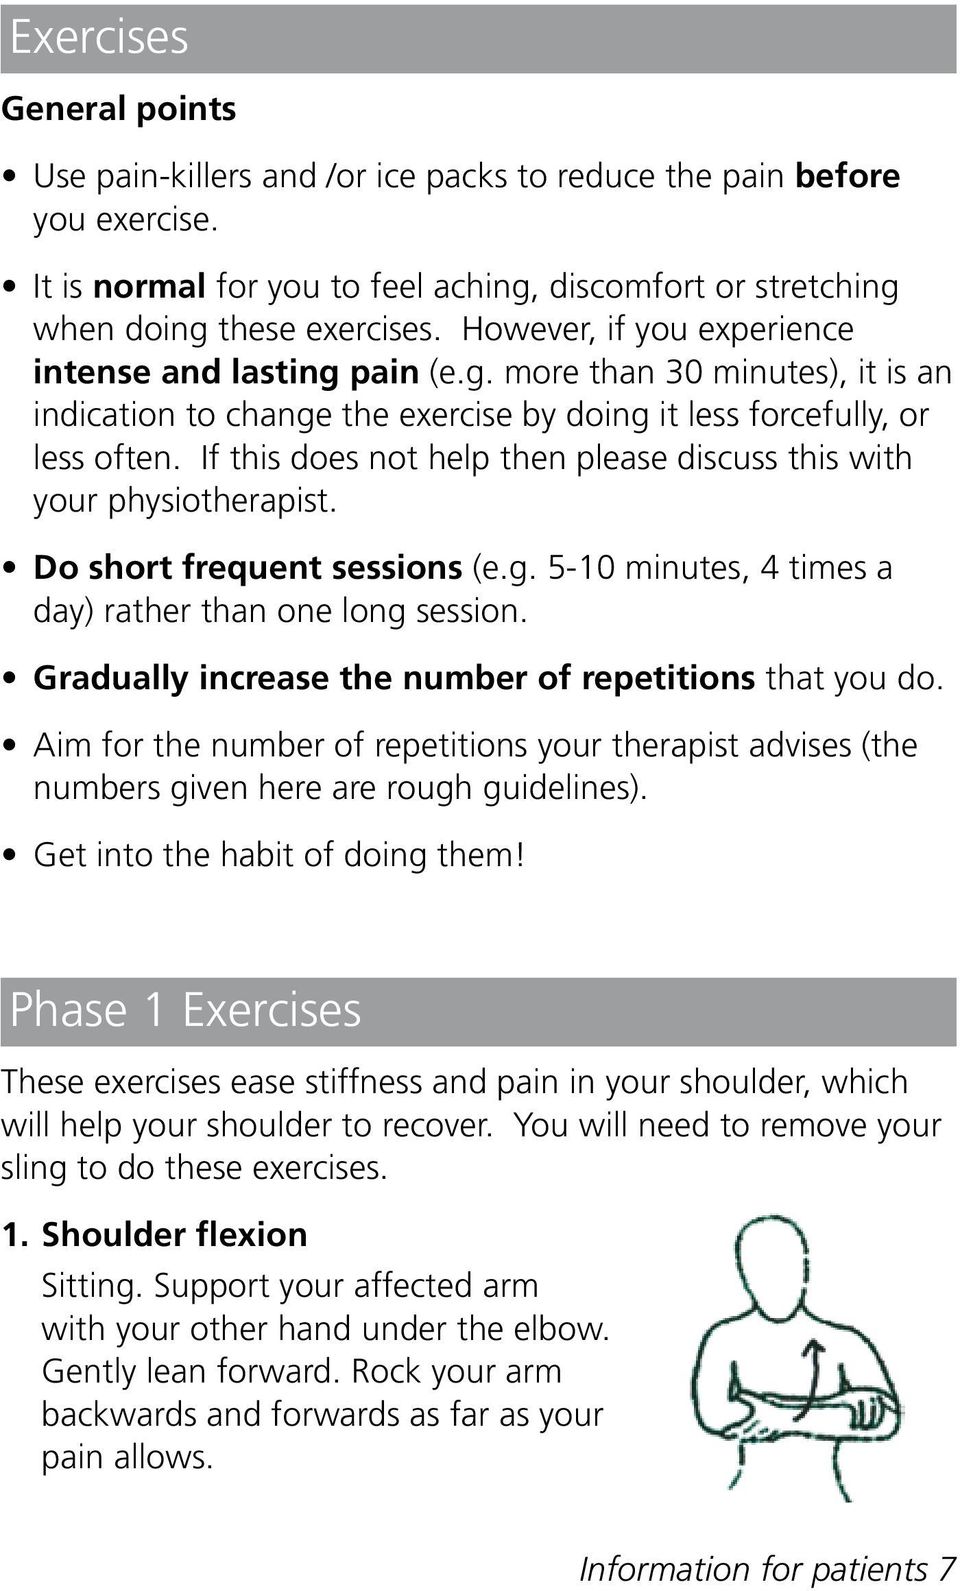 If this does not help then please discuss this with your physiotherapist. Do short frequent sessions (e.g. 5-10 minutes, 4 times a day) rather than one long session.